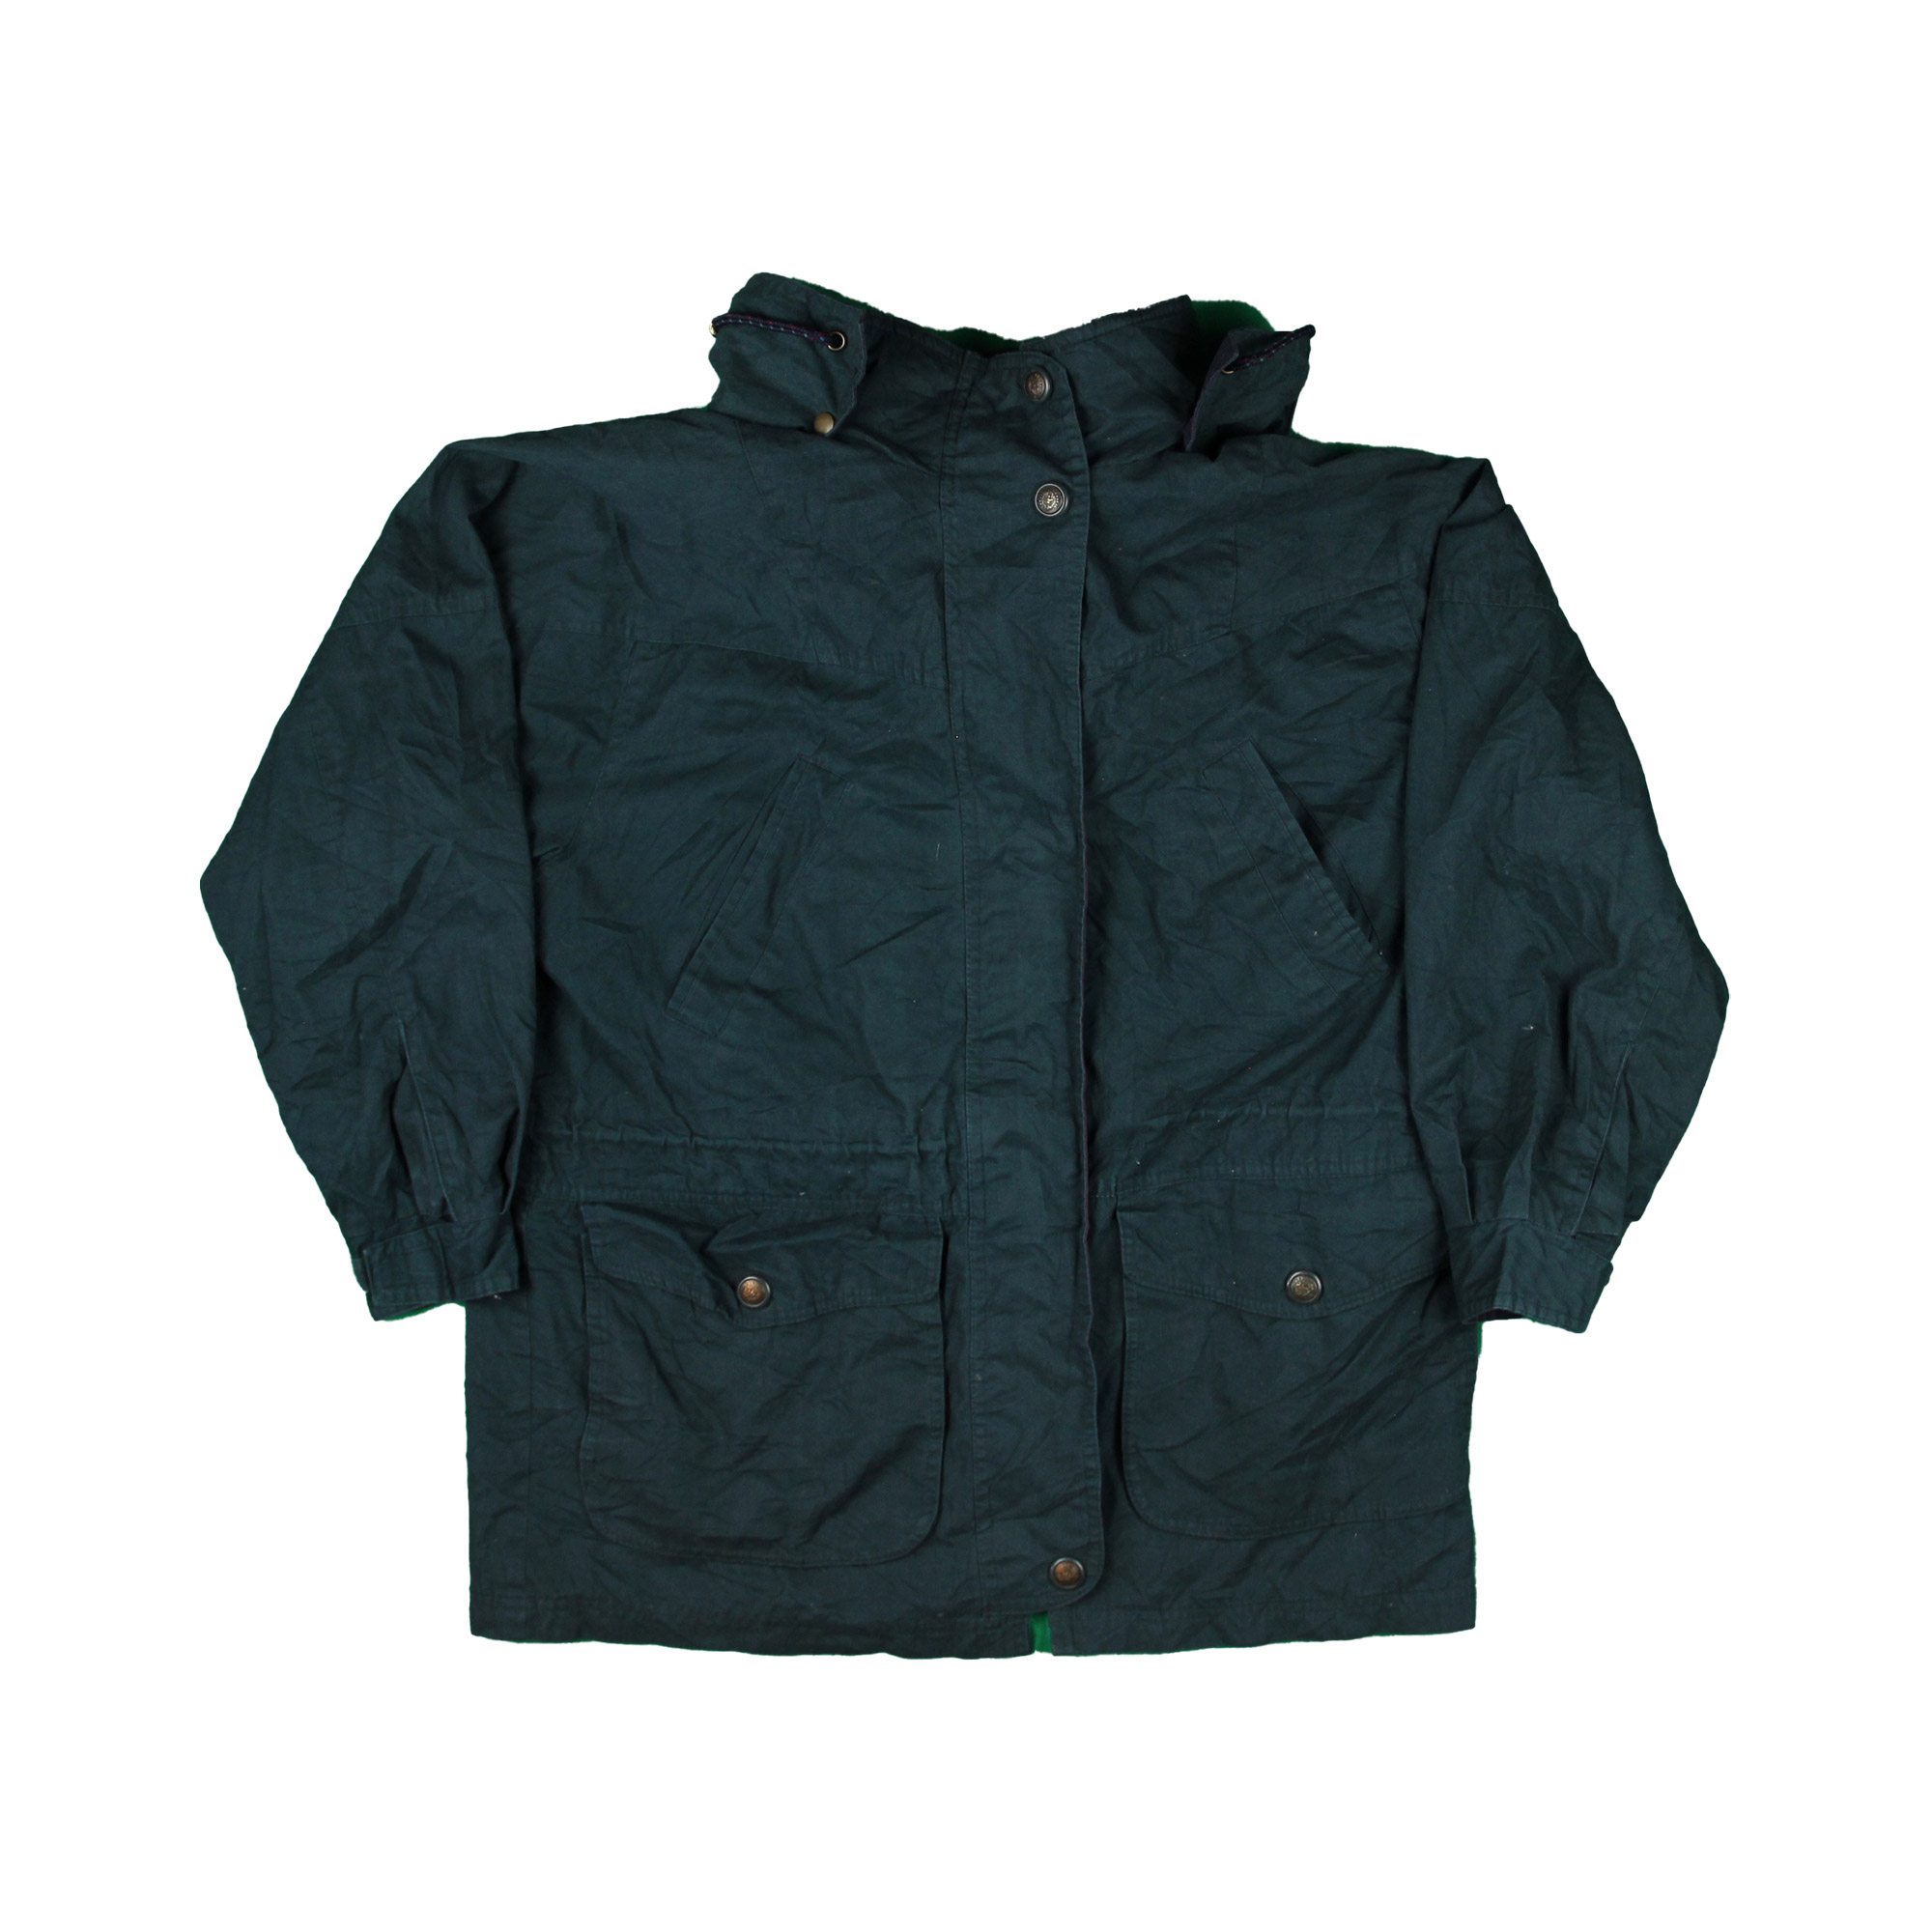 Pacific Trail Jacket - S